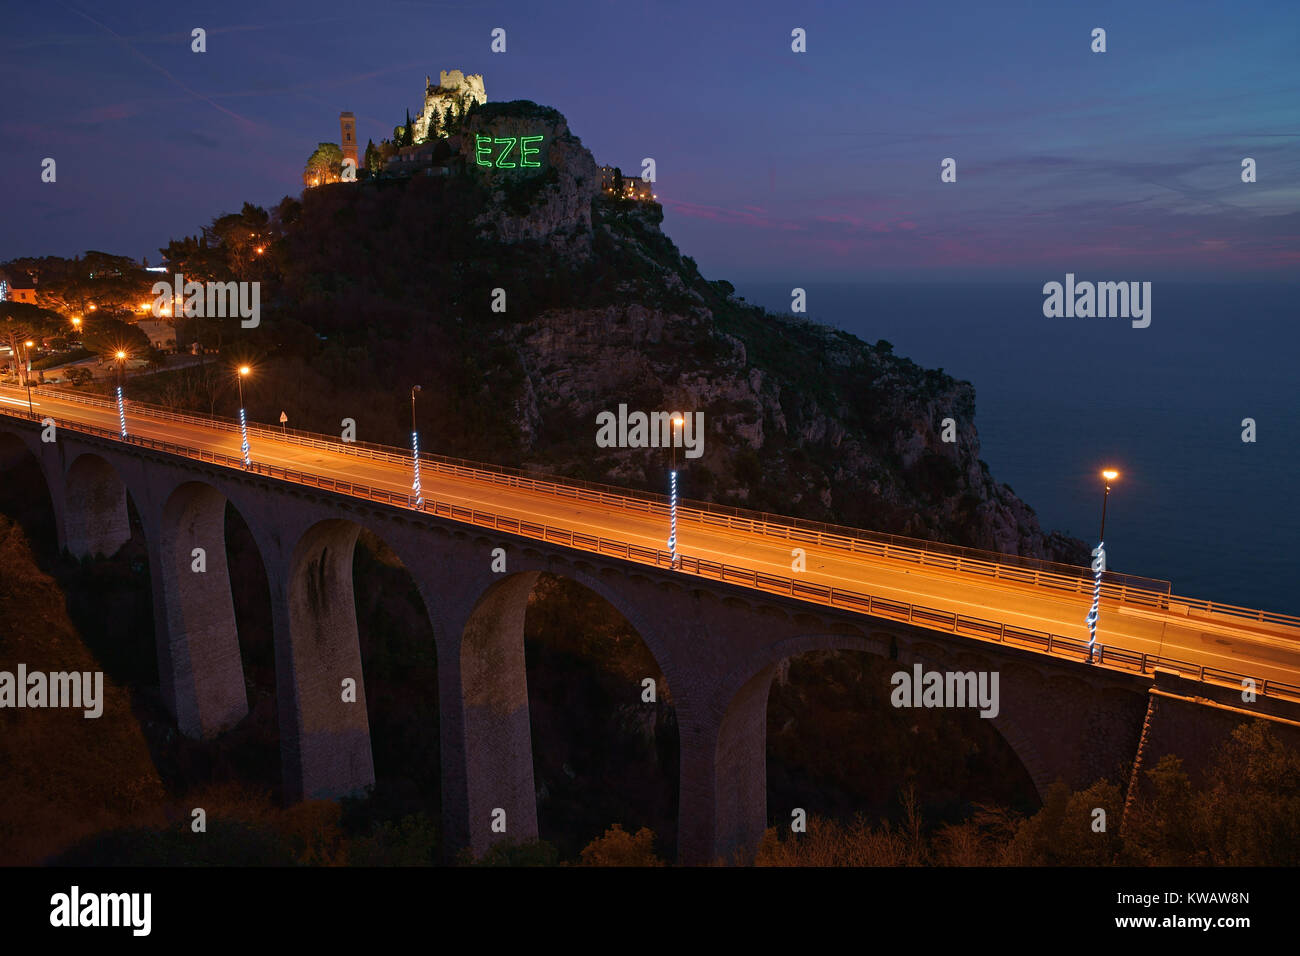 Time exposure of Èze-Village with its access bridge. Village's name displayed on the cliff with a laser projection. French Riviera, France. Stock Photo